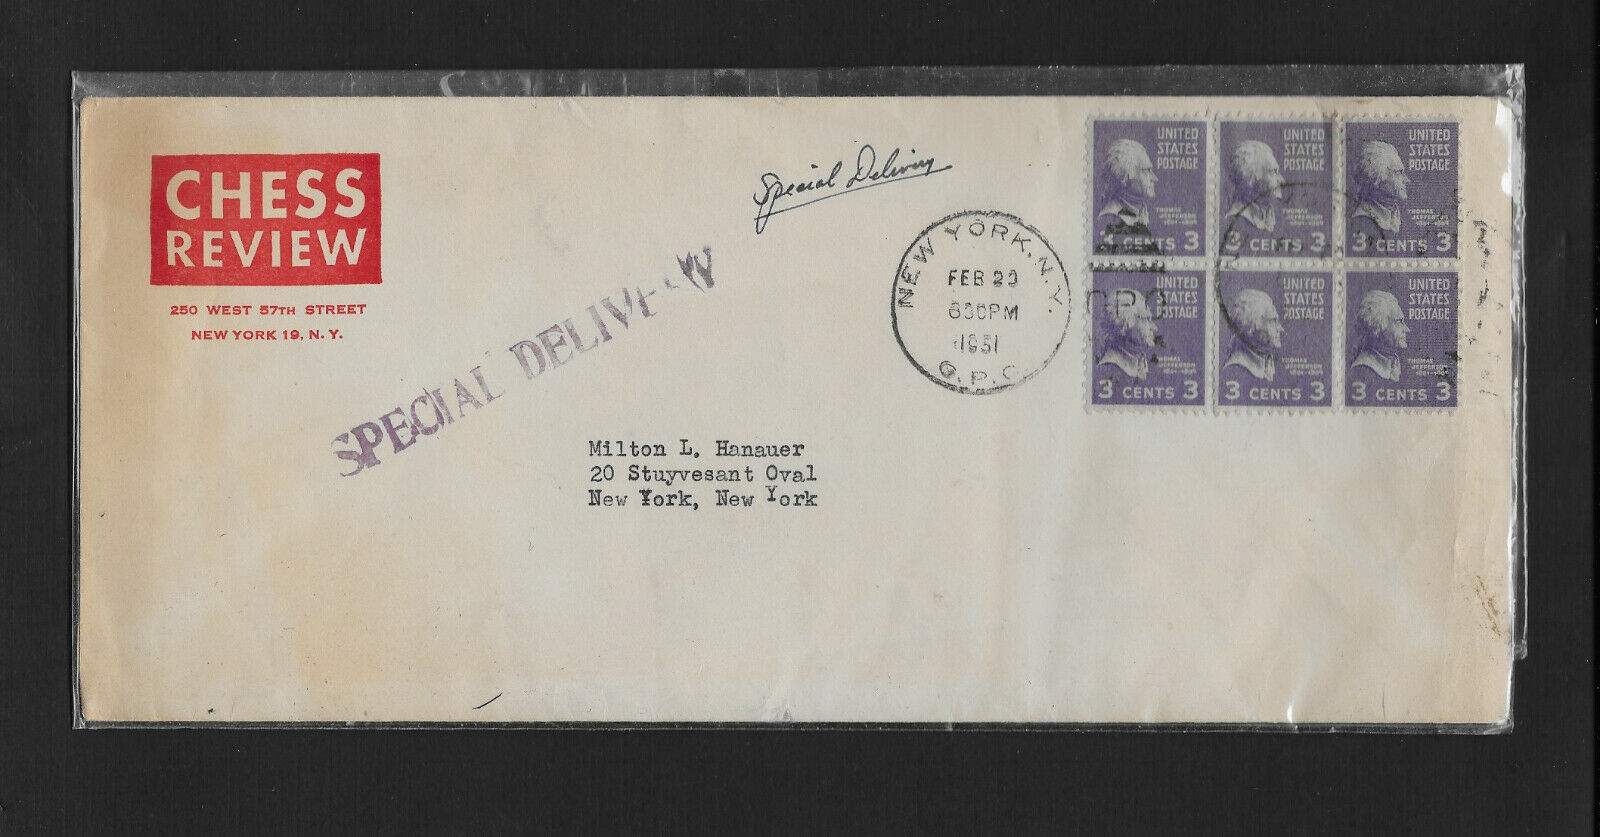 Usa Chess Review Special Delivery Letter Feb 23, 1951